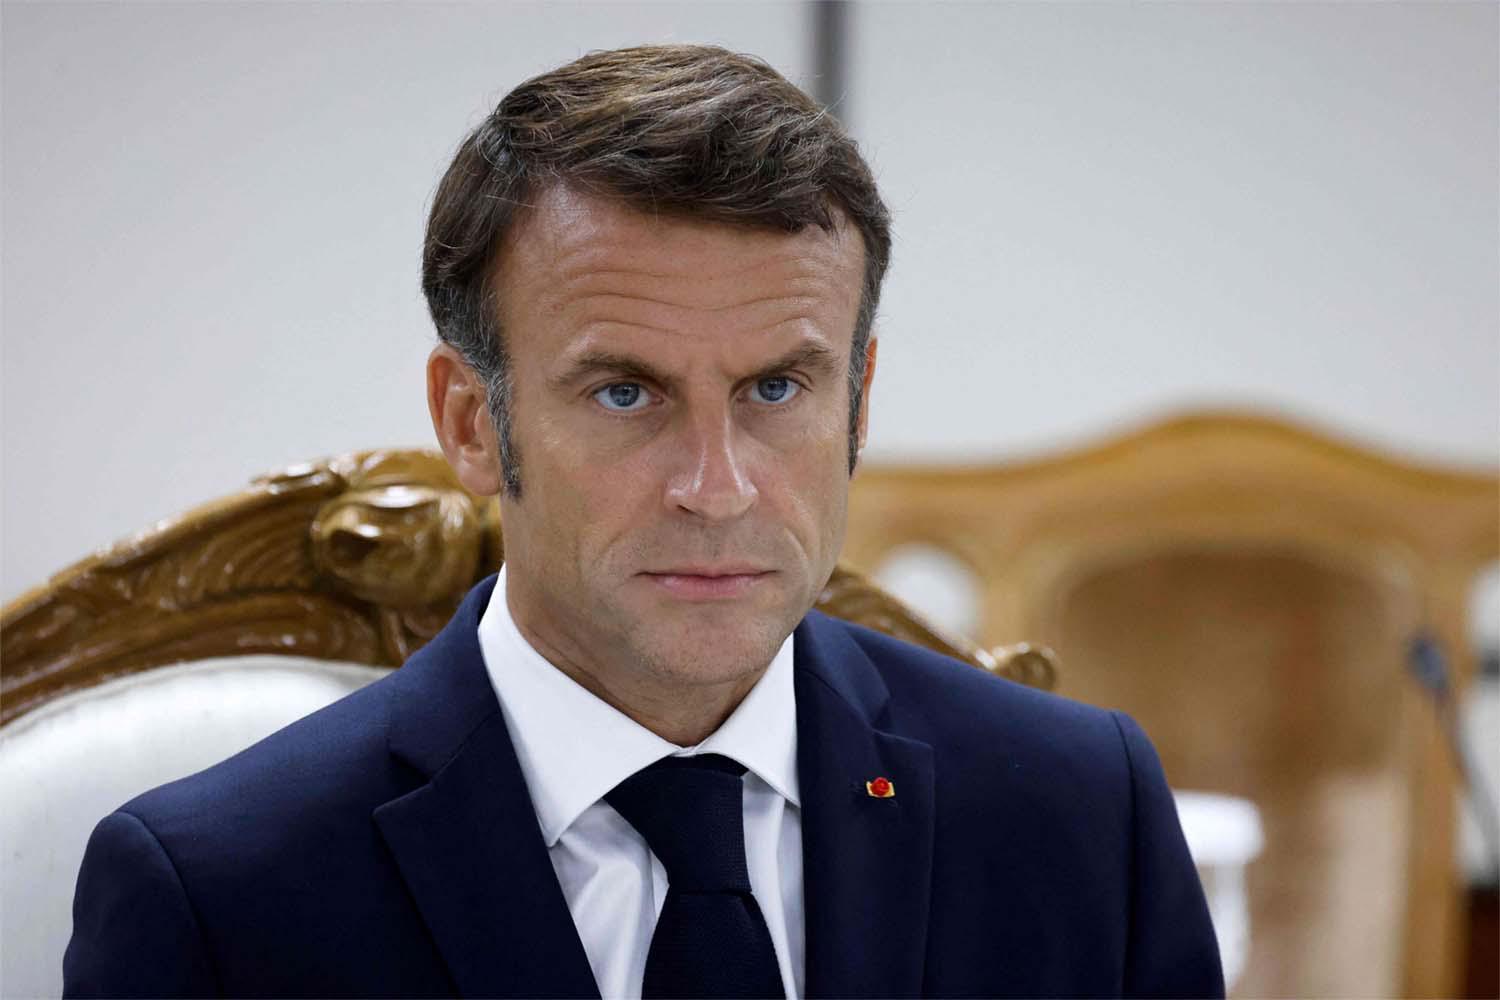 Macron: We are at the disposal of their sovereign decision